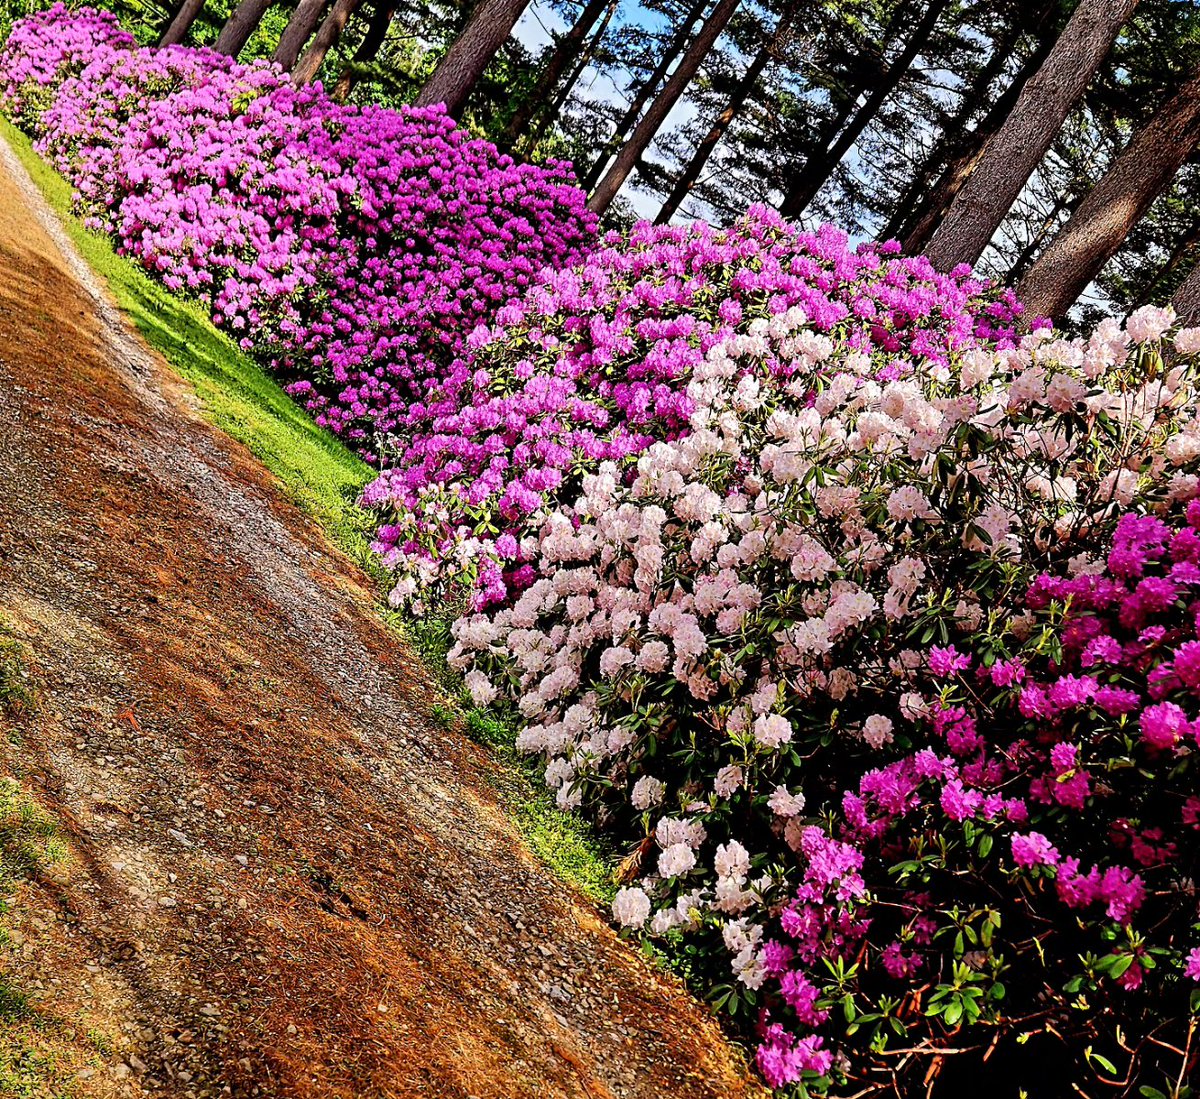 The most majestic #rhododendron  in the #chagrinvalley #ChagrinFalls #SmallTownUSA